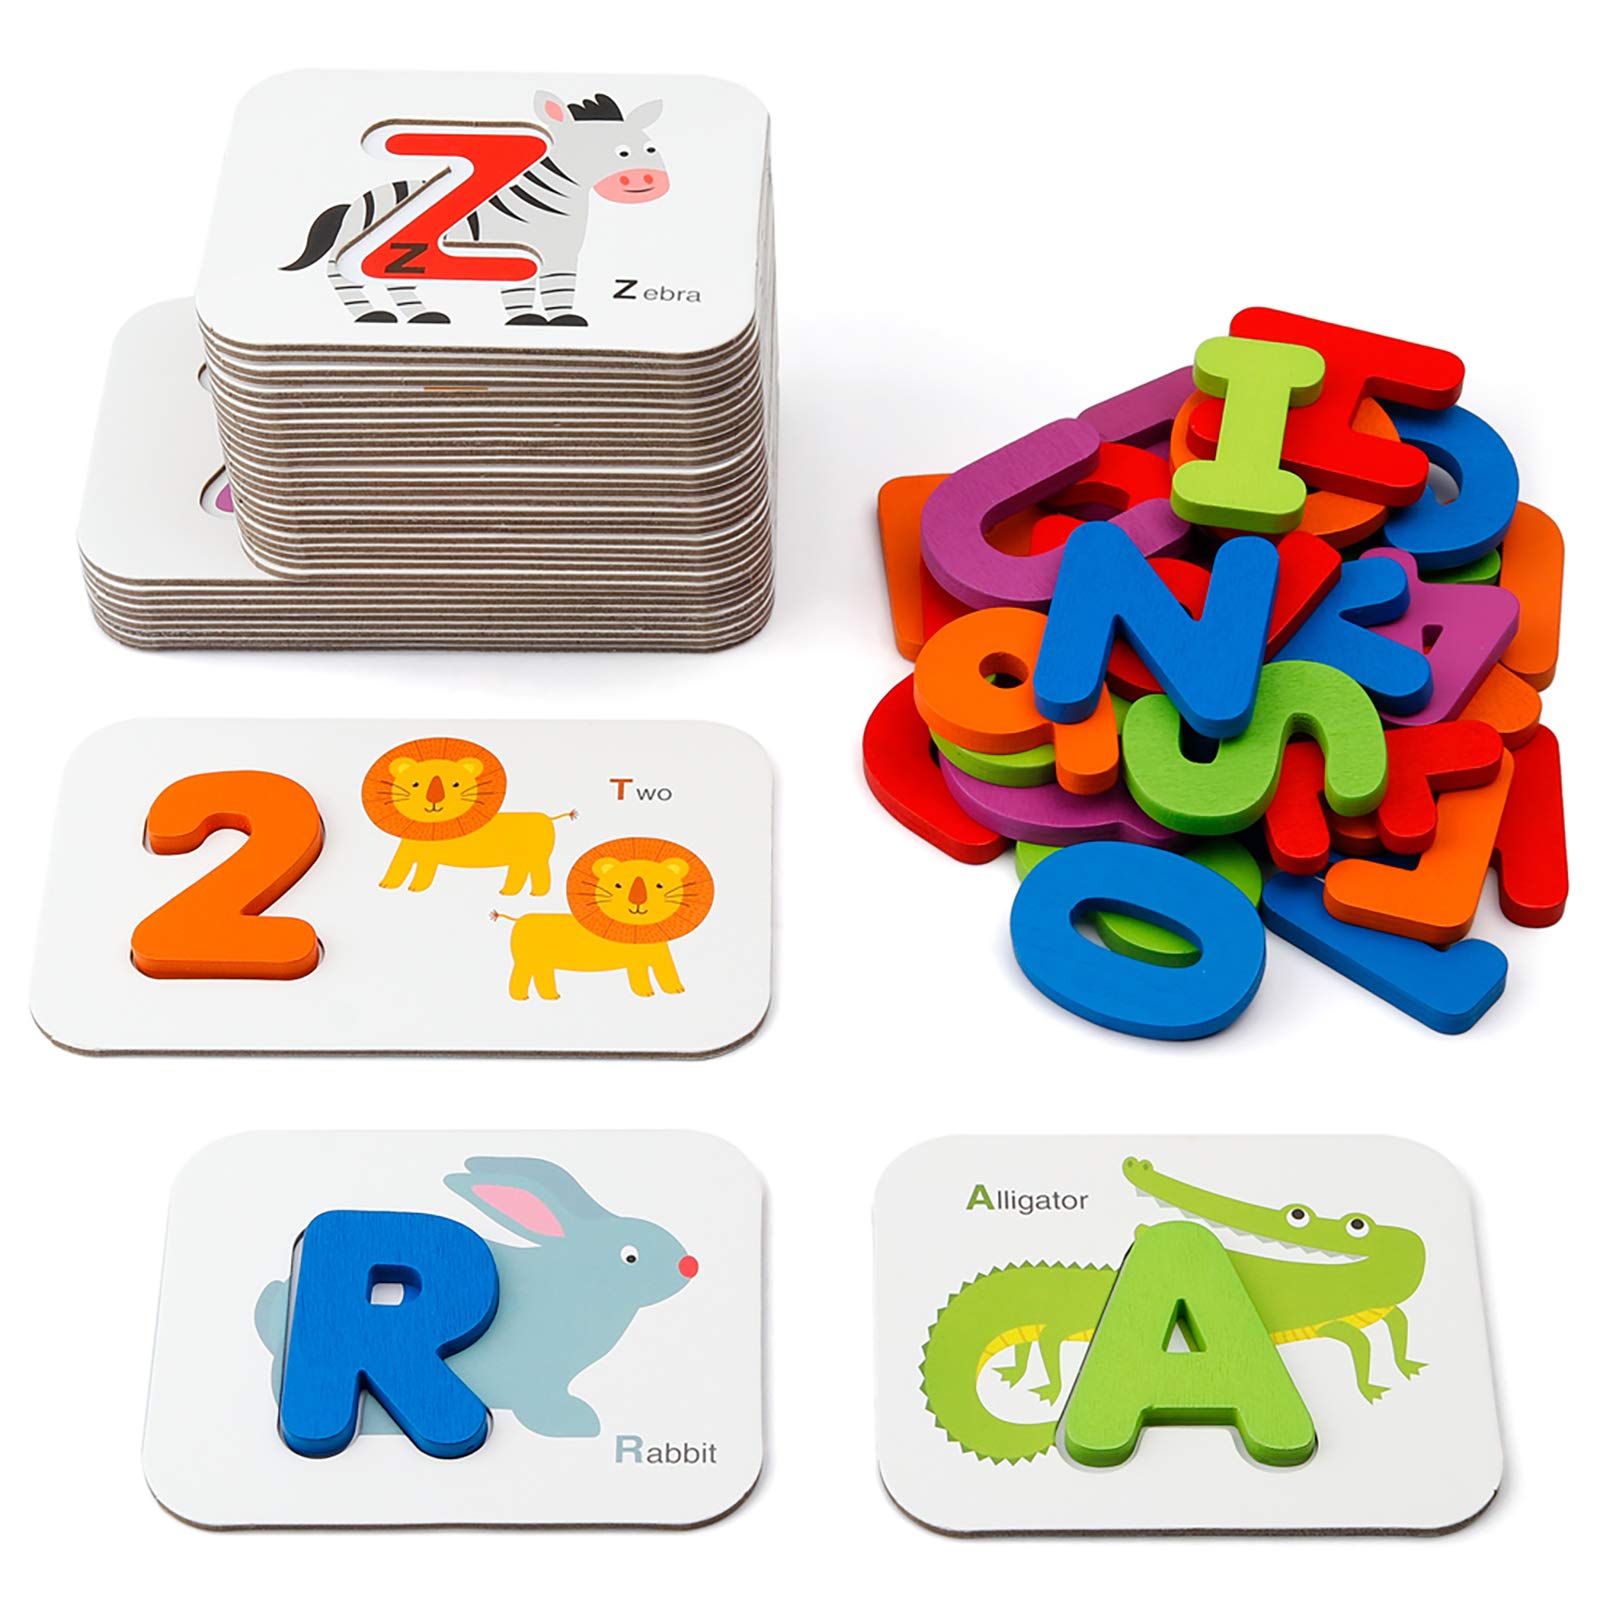 Coogam Numbers and Alphabets Flash Cards Set - ABC Wooden Letters and Numbers Animal Card Board Matching Puzzle Game Montessori Educational Toys Gift for Kids Age 3 4 5 Preschool and Up Years